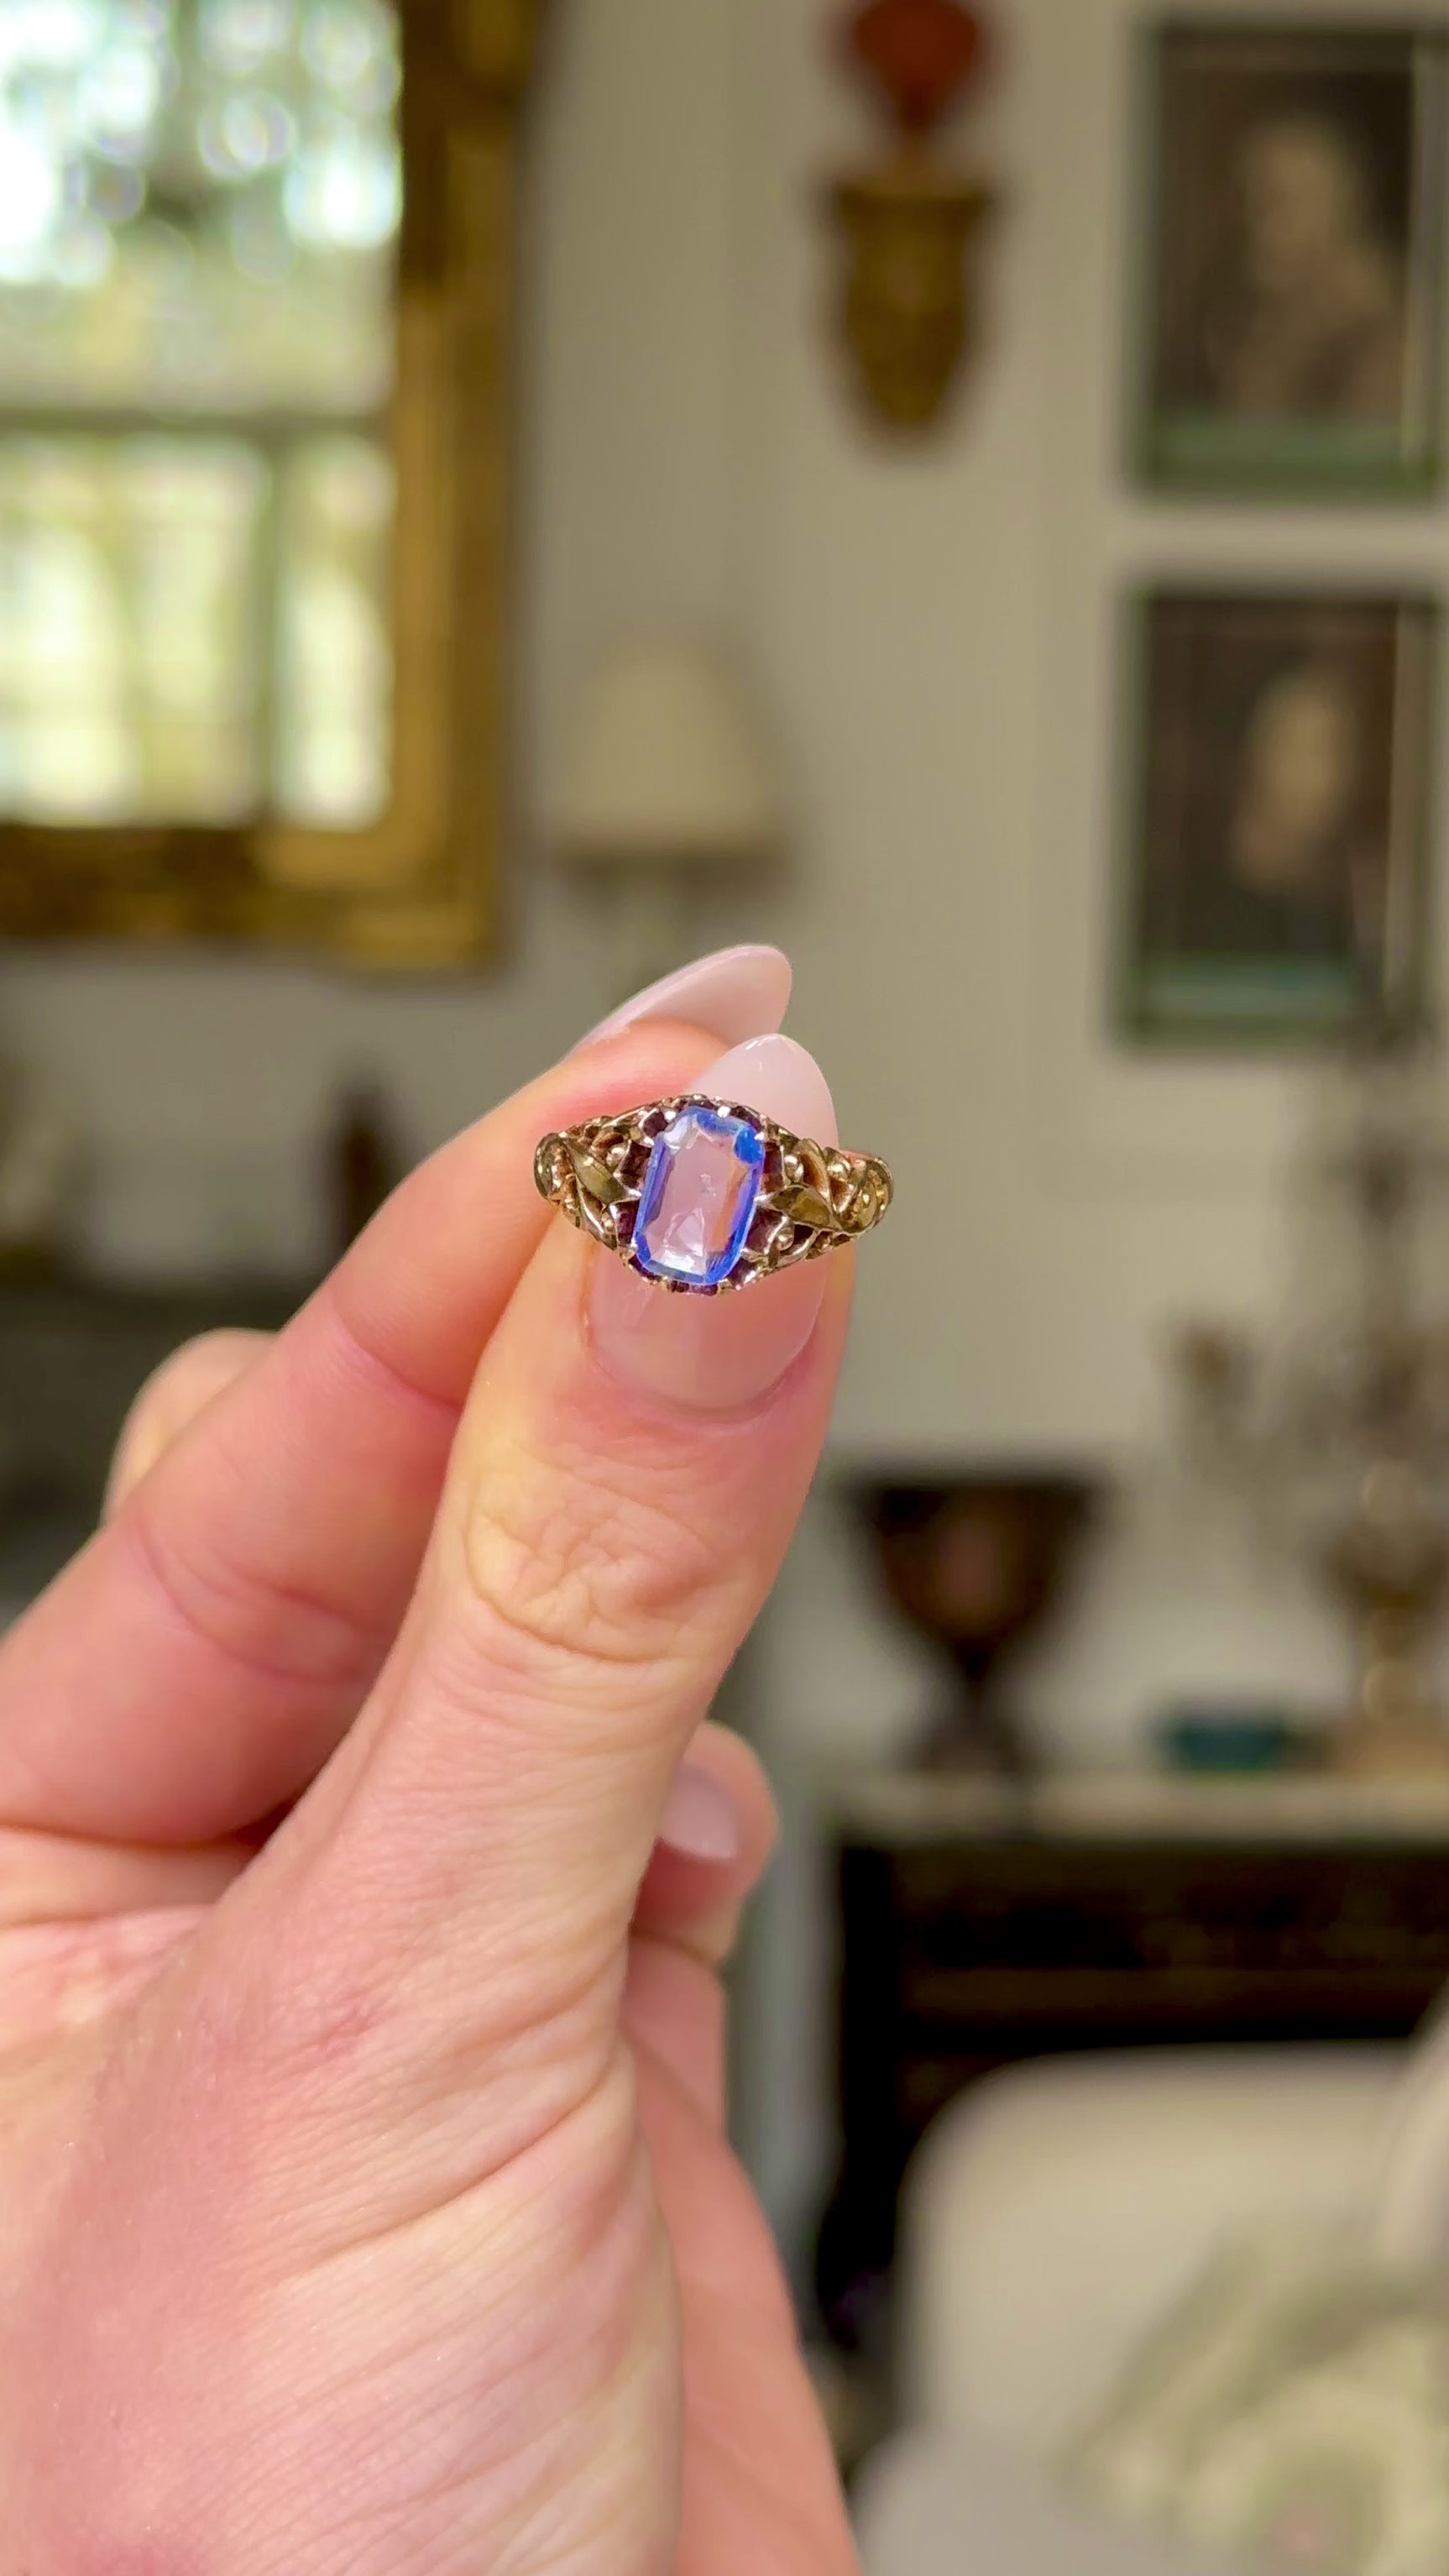 Antique, Victorian Ceylon Sapphire Ring, held in fingers and moved around to give perspective.